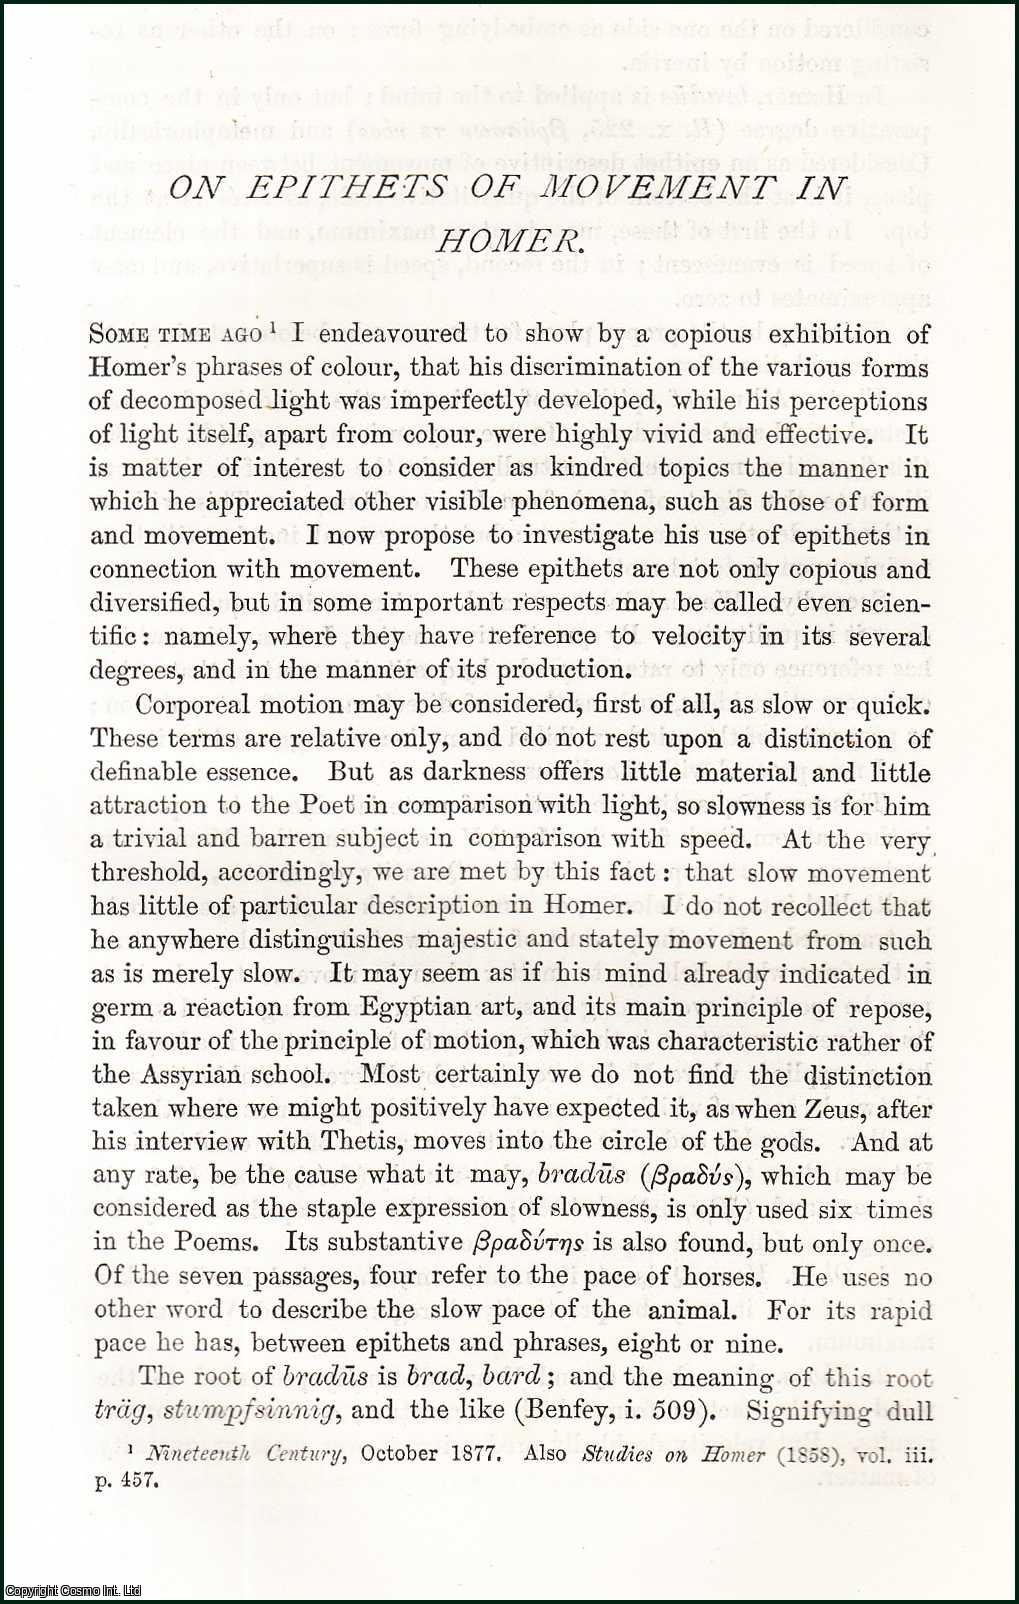 W.E. Gladstone - On Epithets of Movement in Homer. An original article from the Nineteenth Century Magazine, 1879.